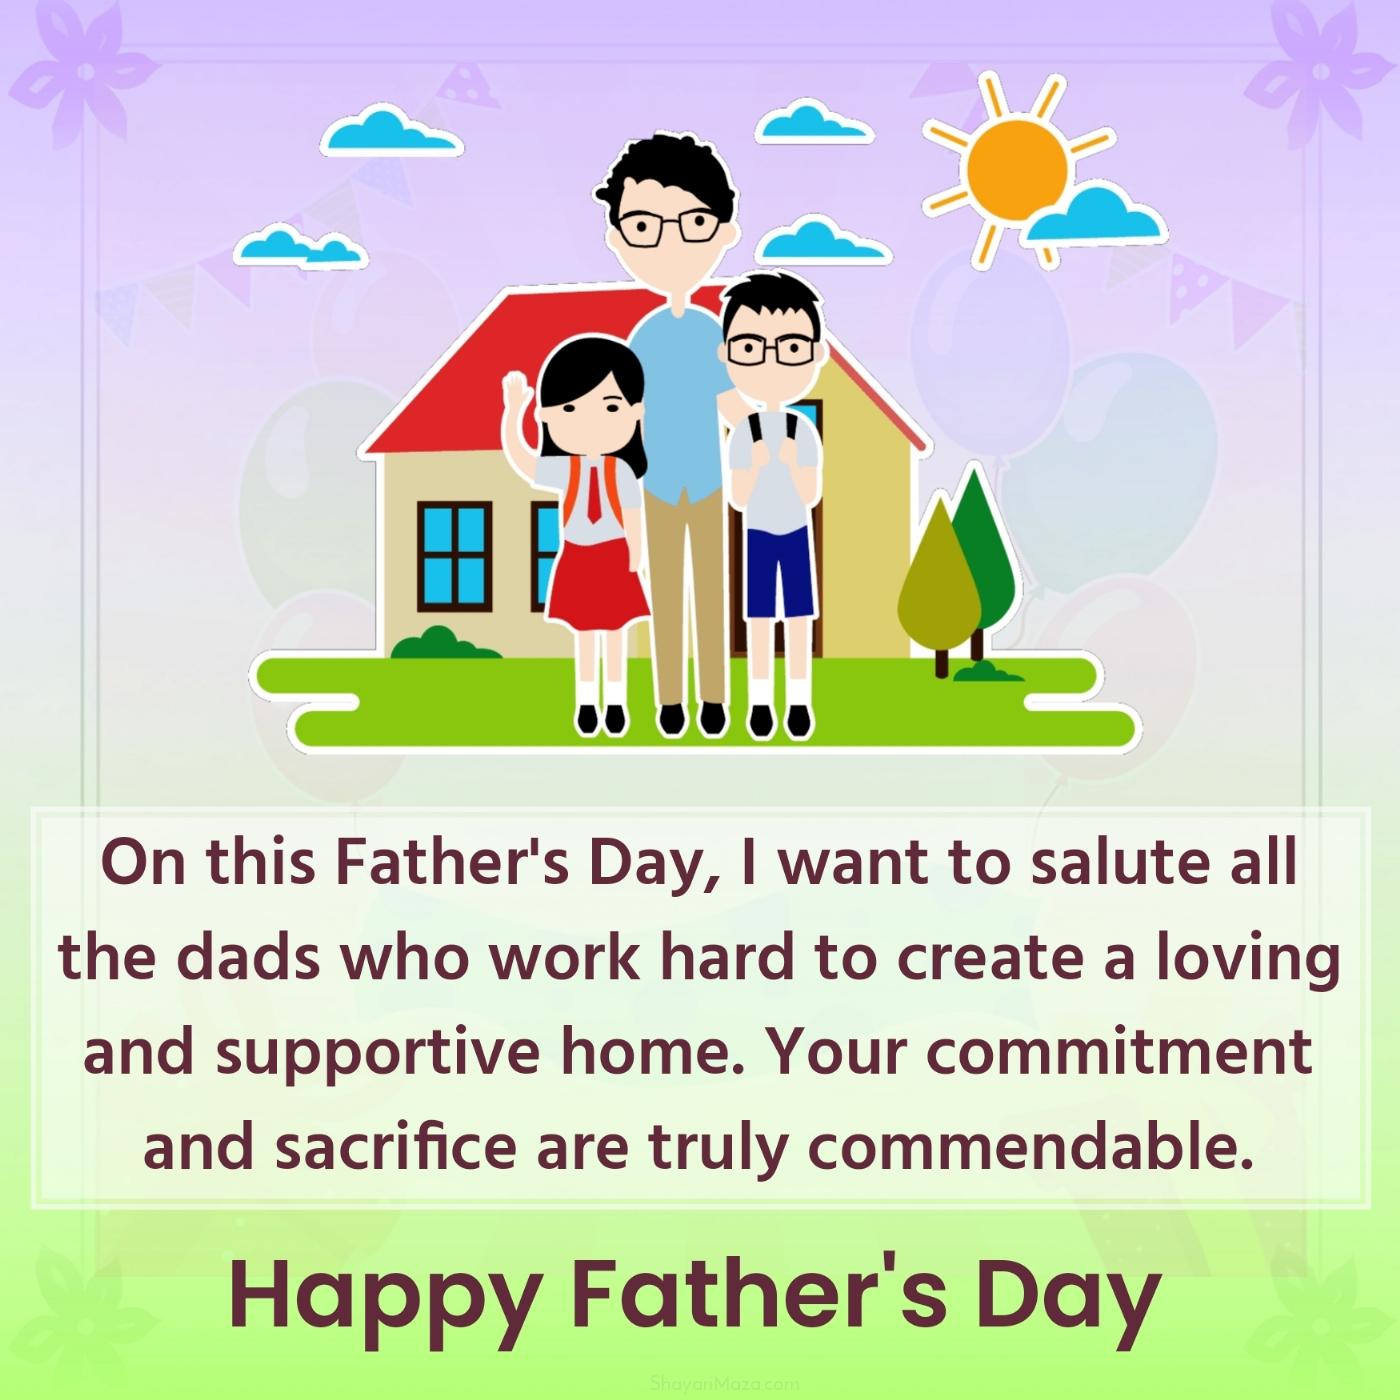 On this Father's Day I want to salute all the dads who work hard